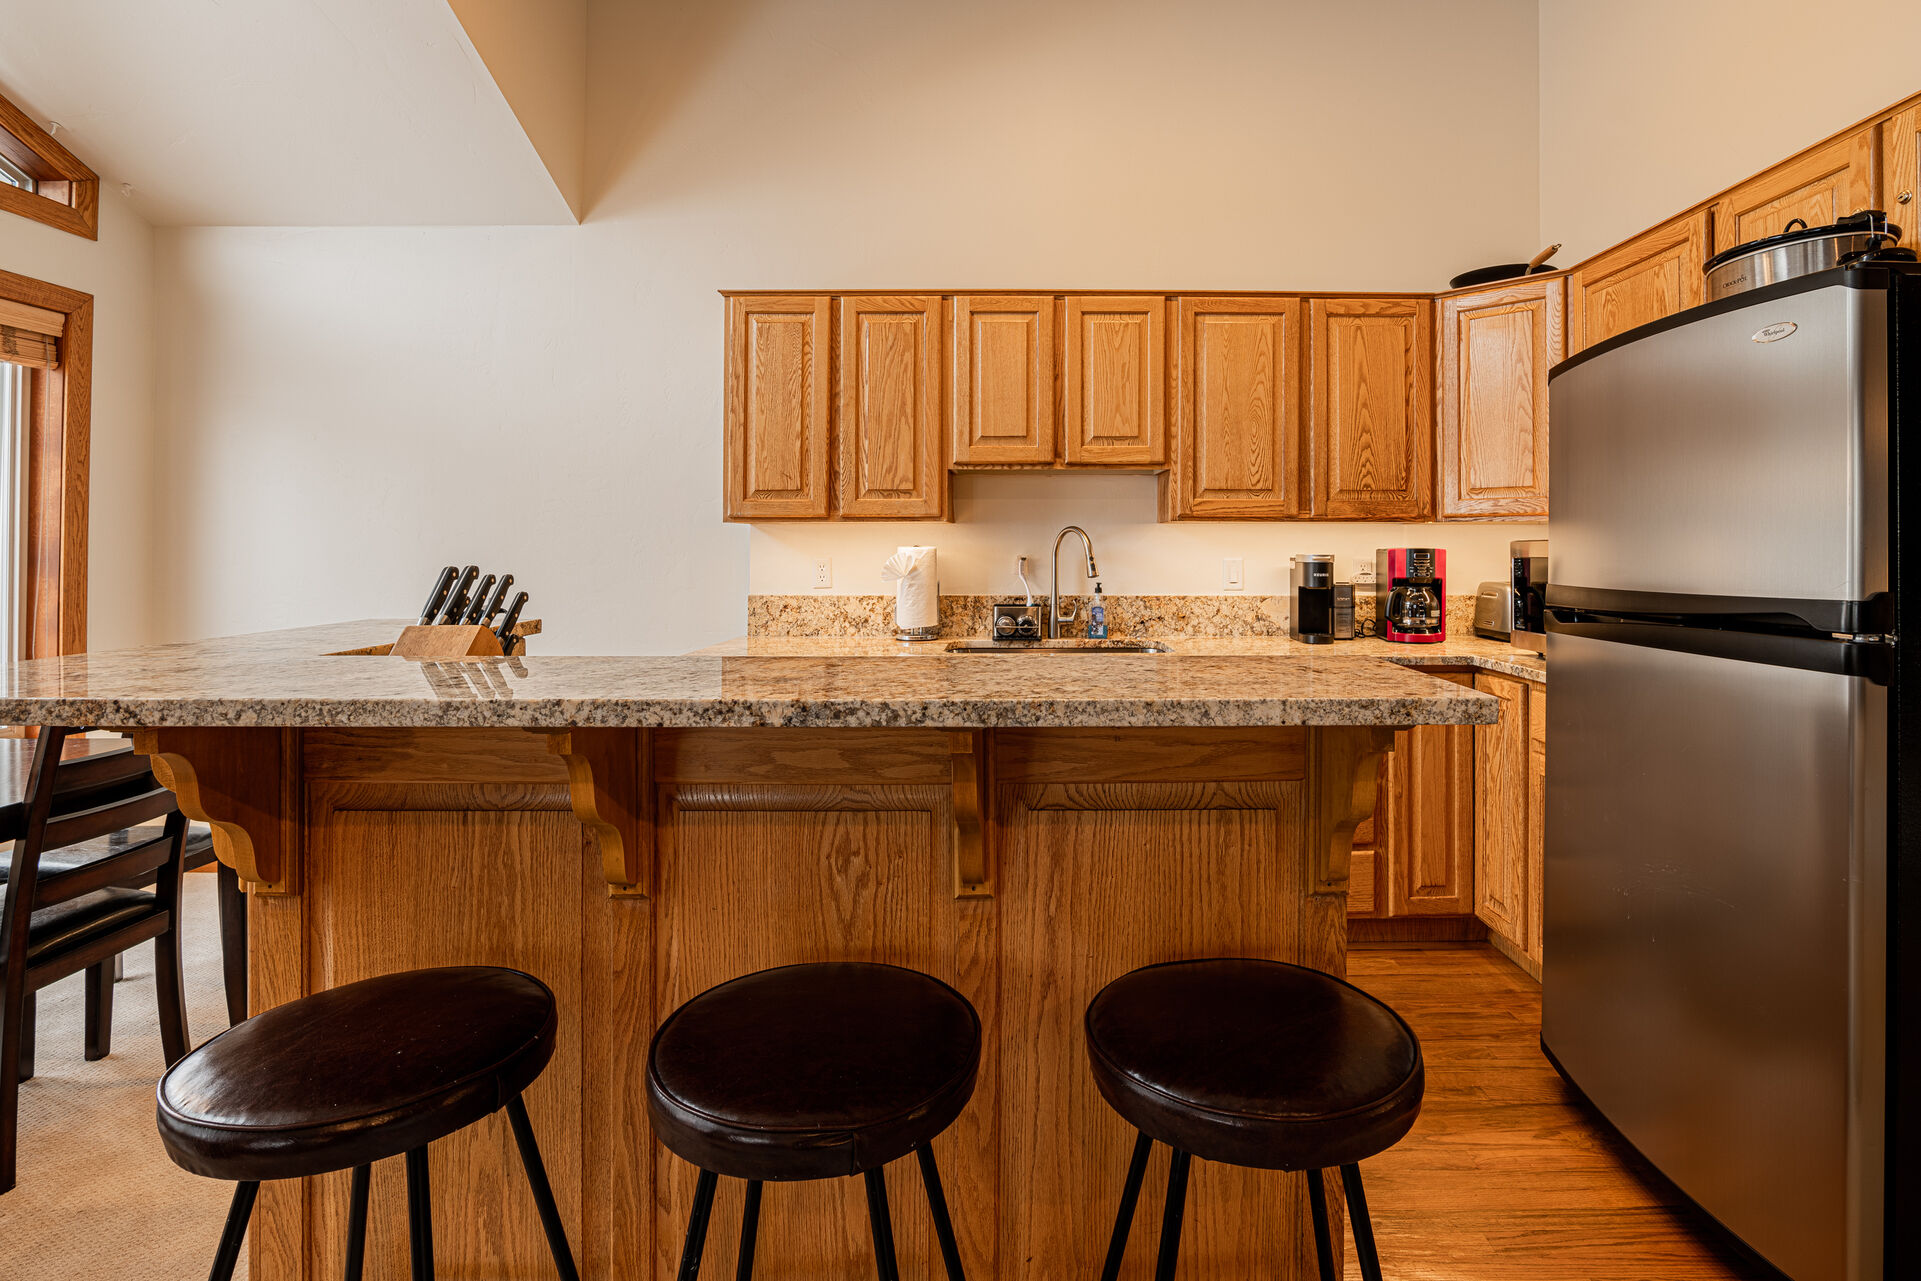 Fully Equipped Kitchen with stone countertops, stainless steel appliances, and bar seating for 3